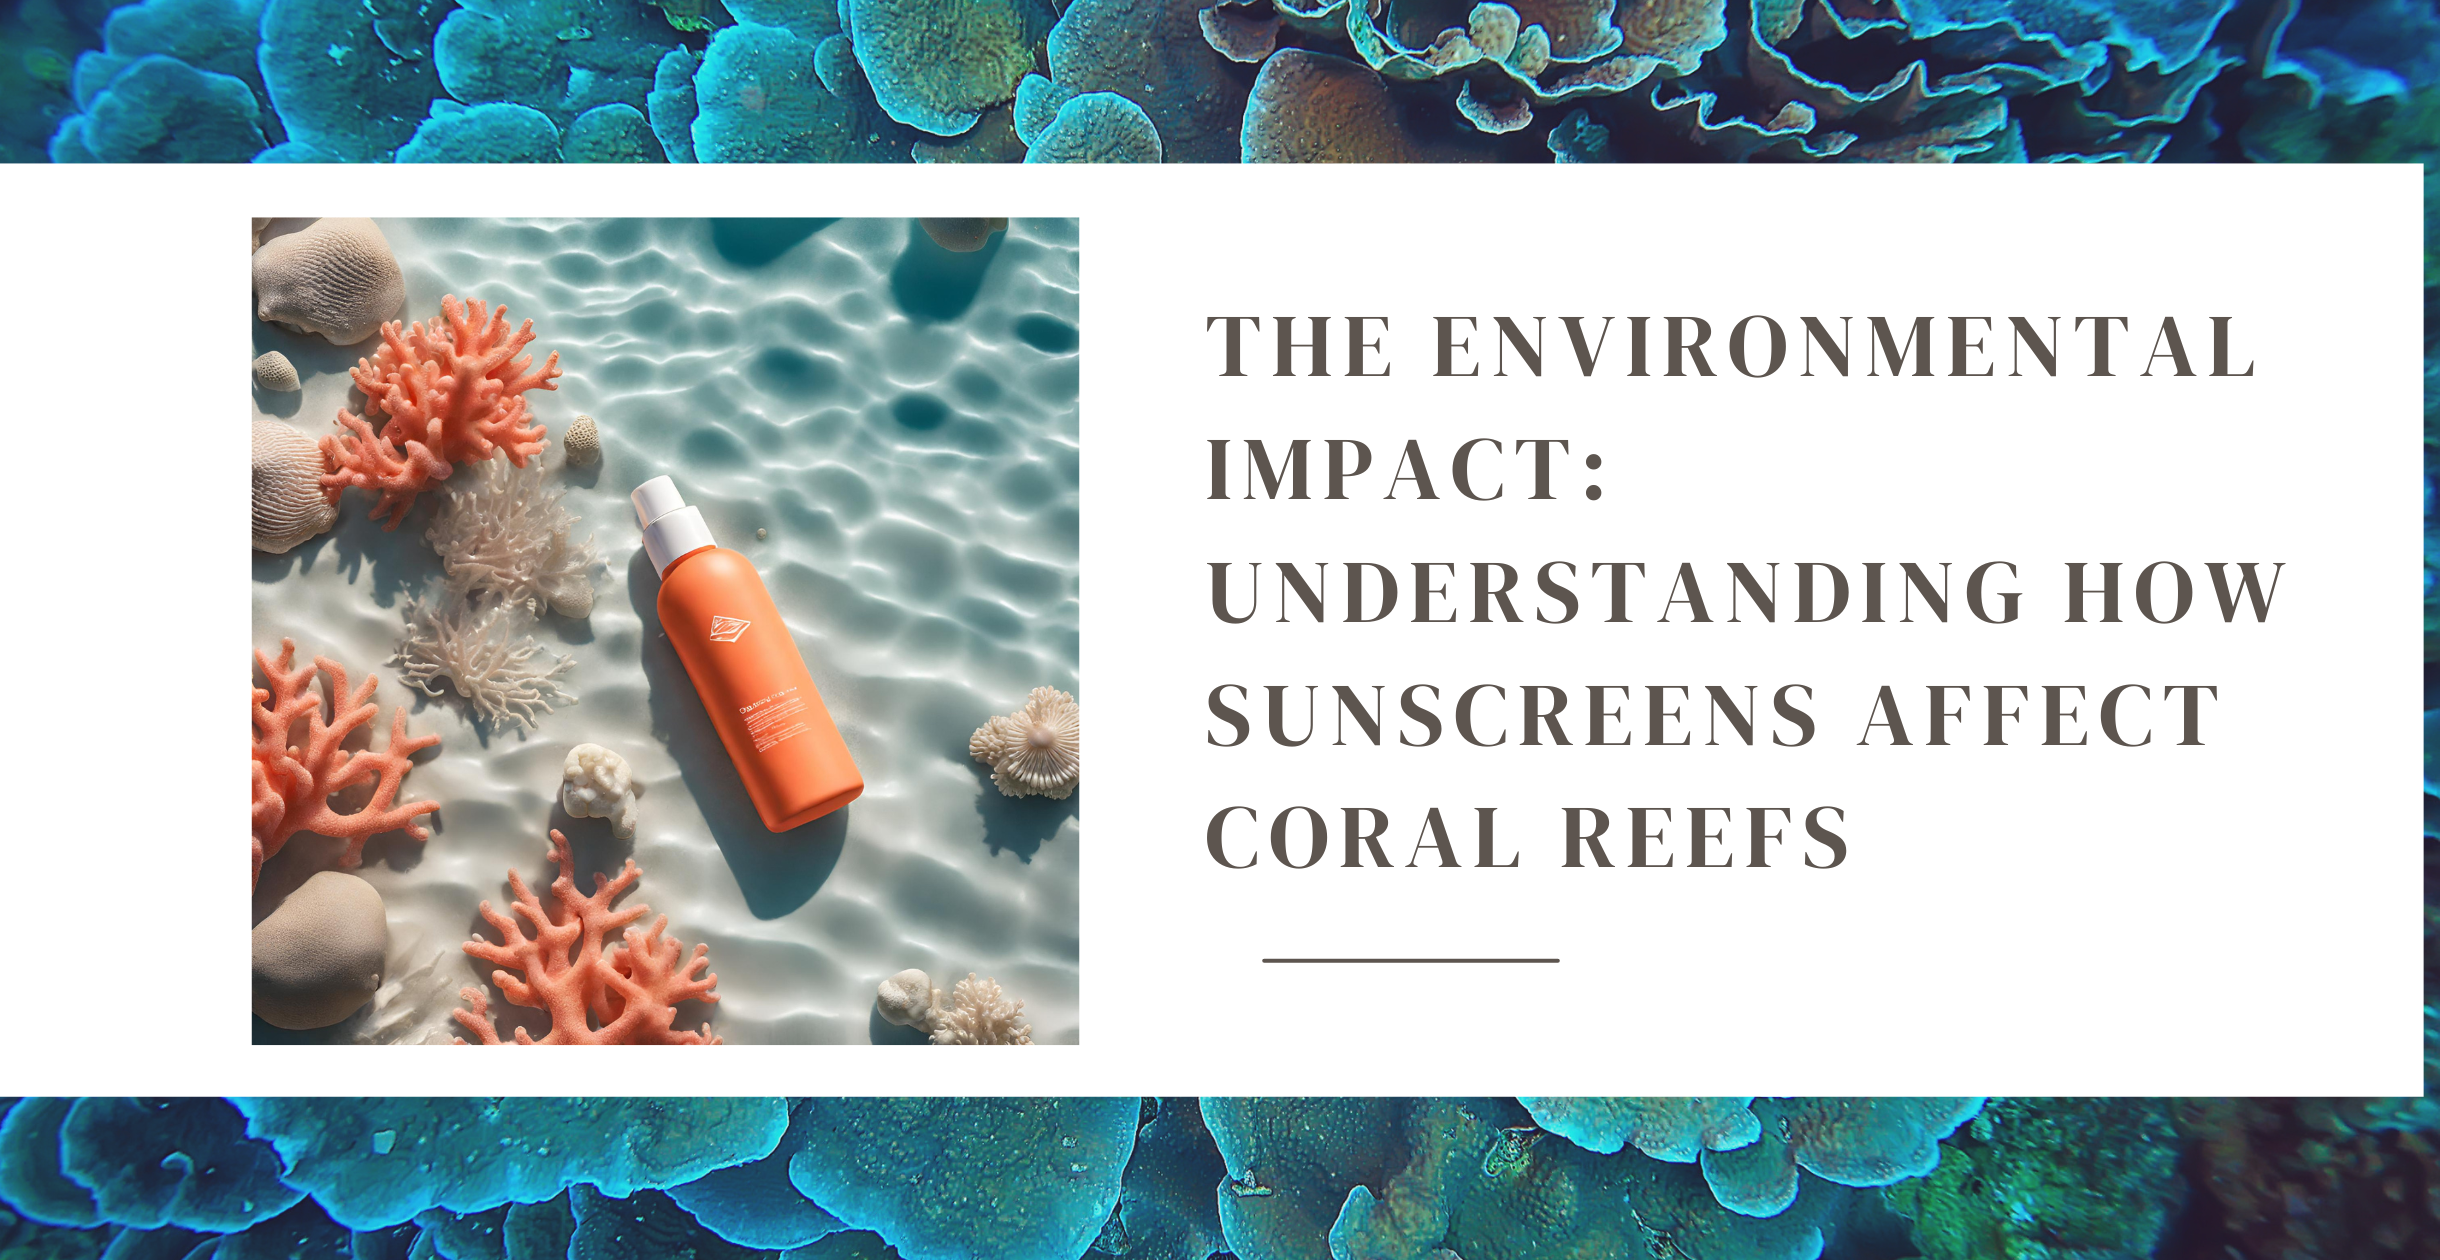 The Environmental Impact: Understanding How Sunscreens Affect Coral Reefs